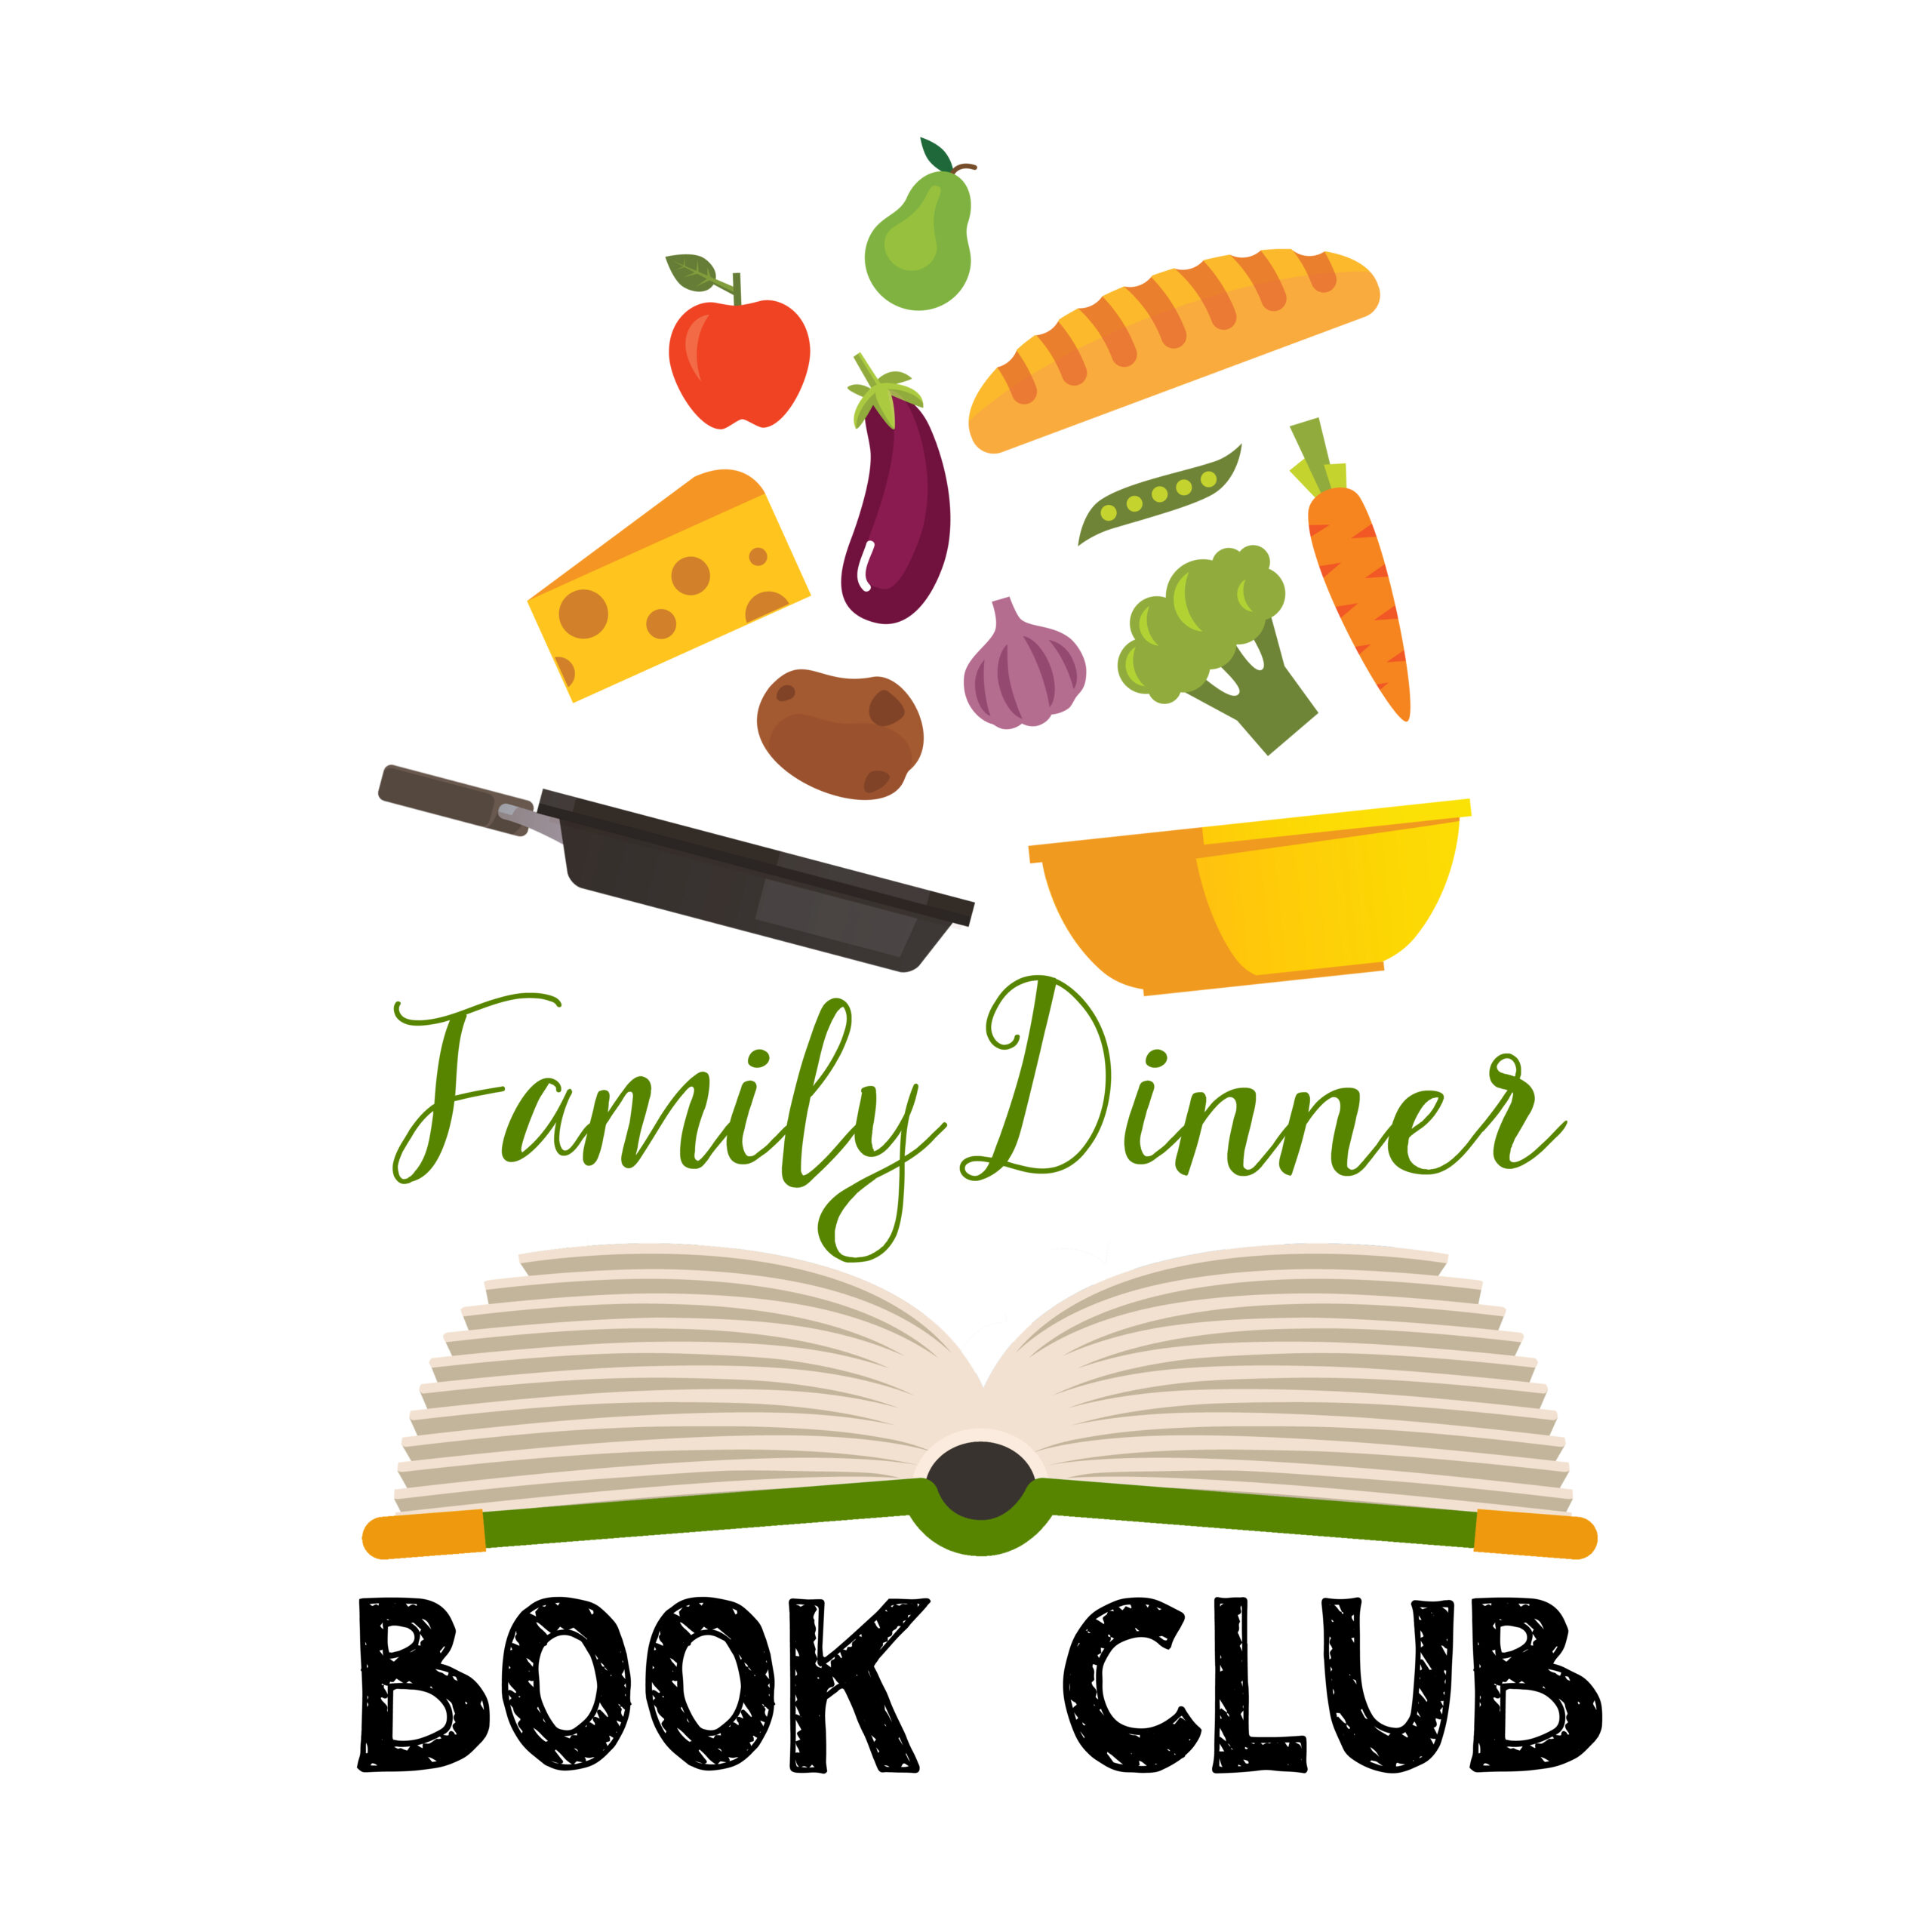 Over 26 Family Dinner Book Club ideas together. Themed menus, table crafts for families, question prompts, and family service projects ideas included for FREE.